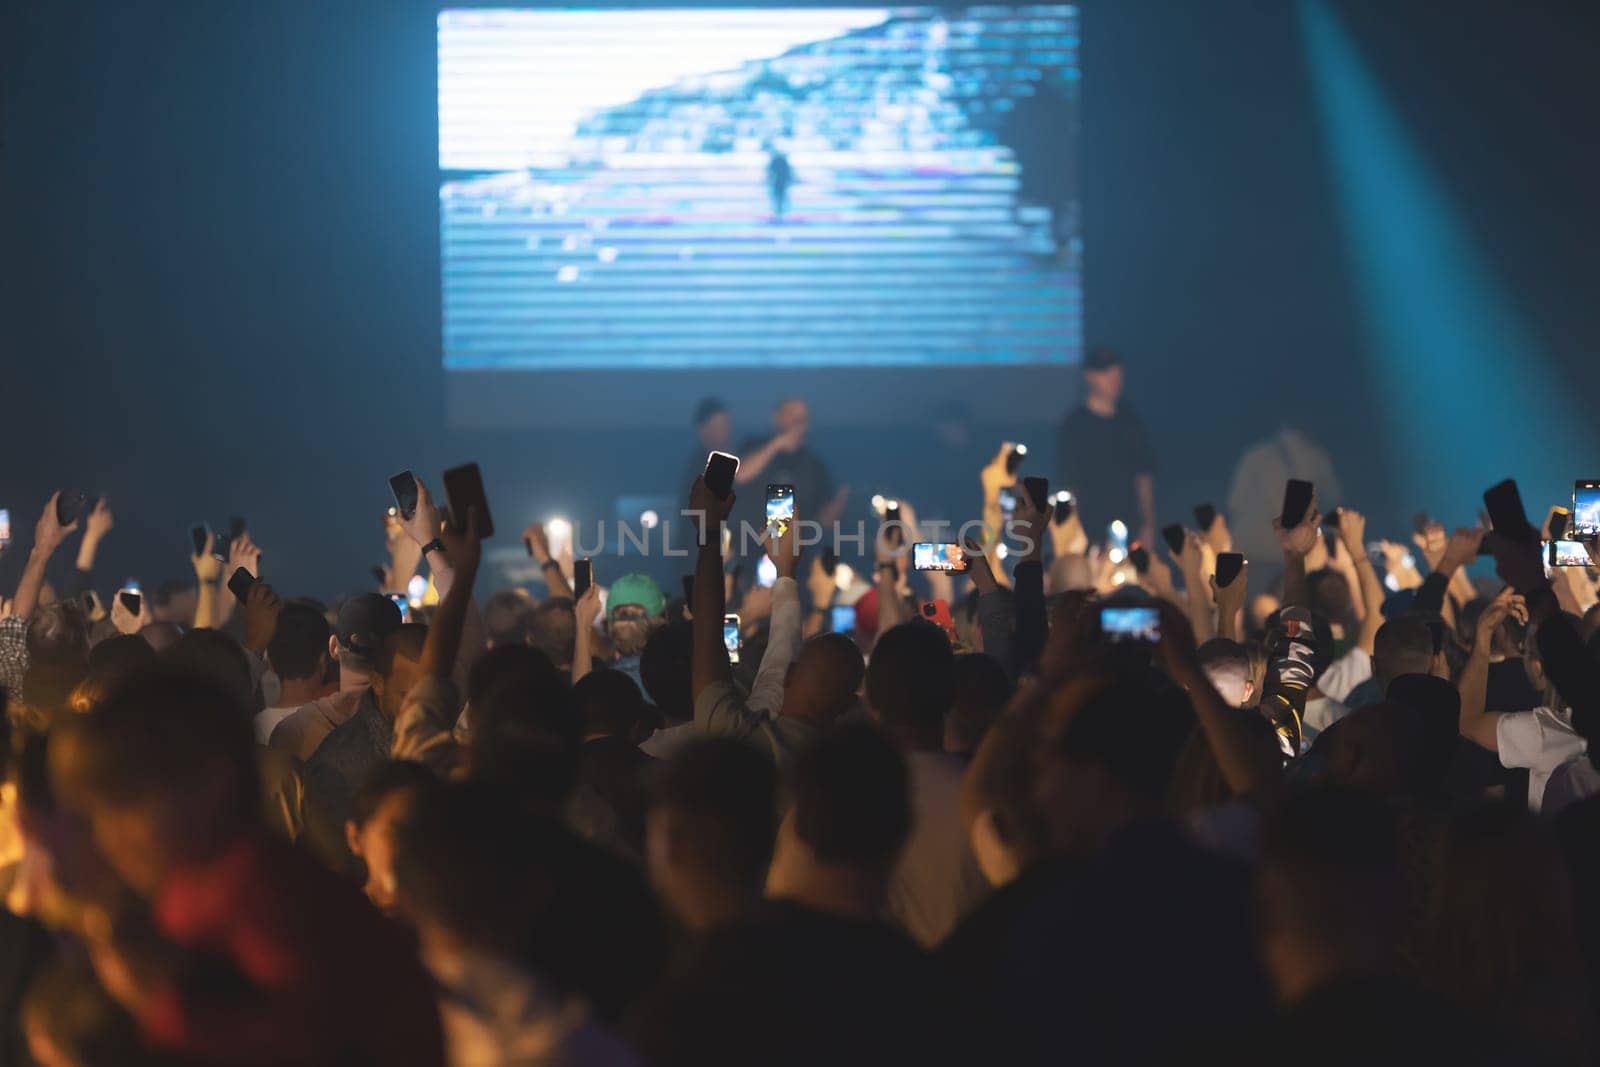 People shoot a concert on their phone cameras. Mid shot